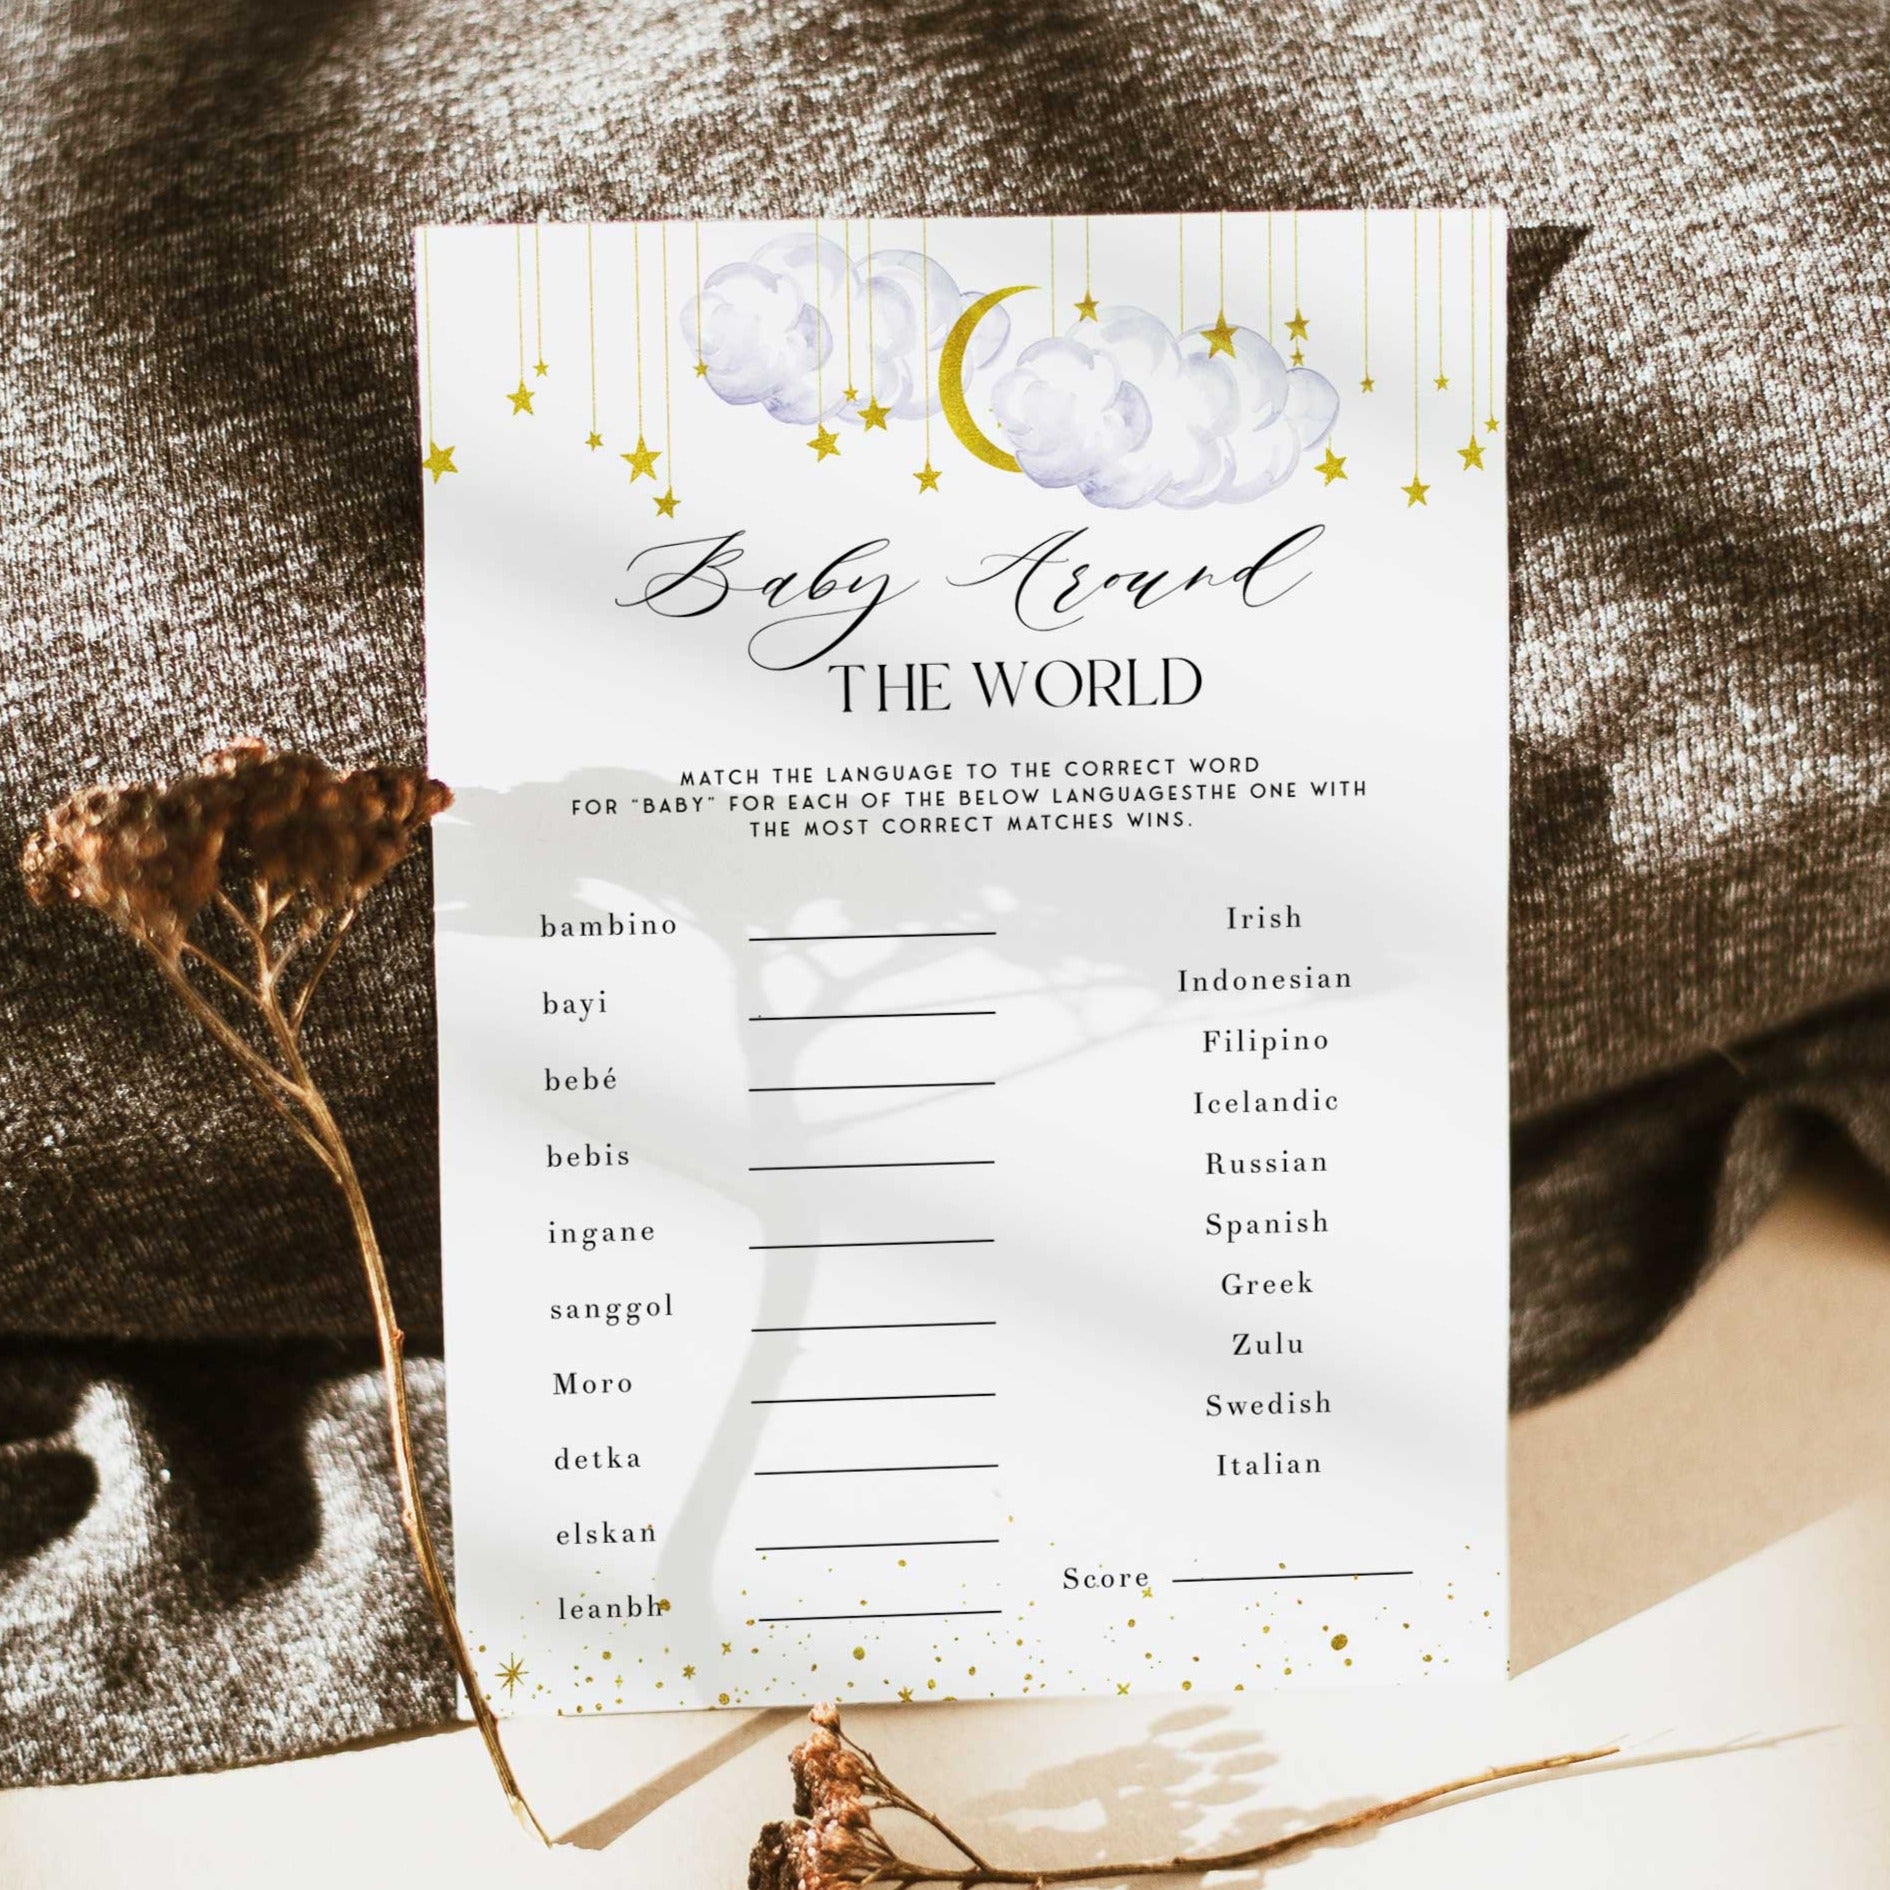 Fully editable and printable baby shower baby around the world game with a little star design. Perfect for a Twinkle Little Star baby shower themed party